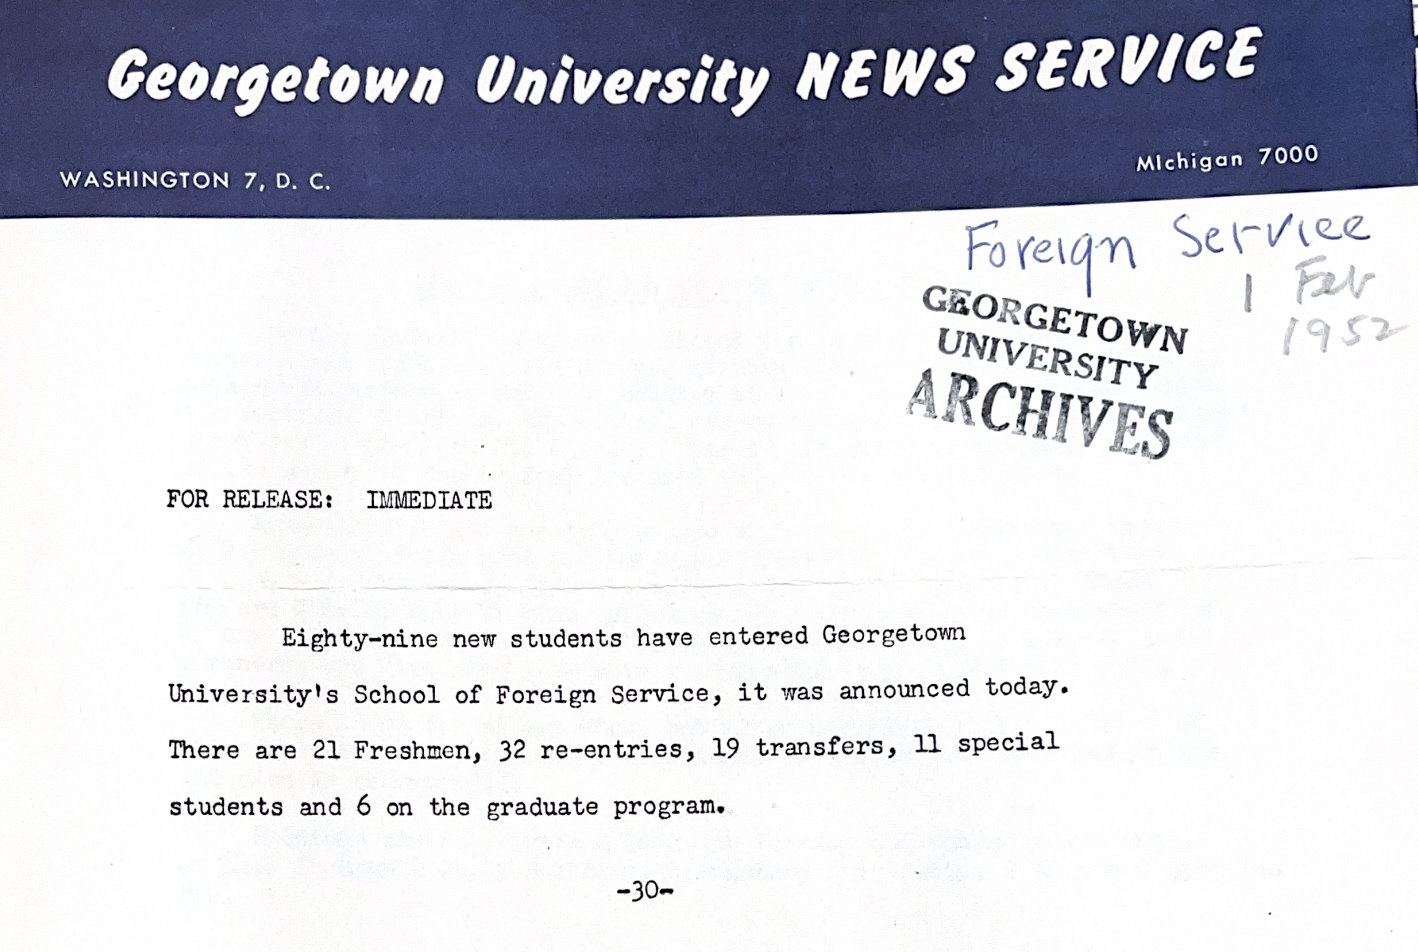 1952 news release with numbers of incoming students 